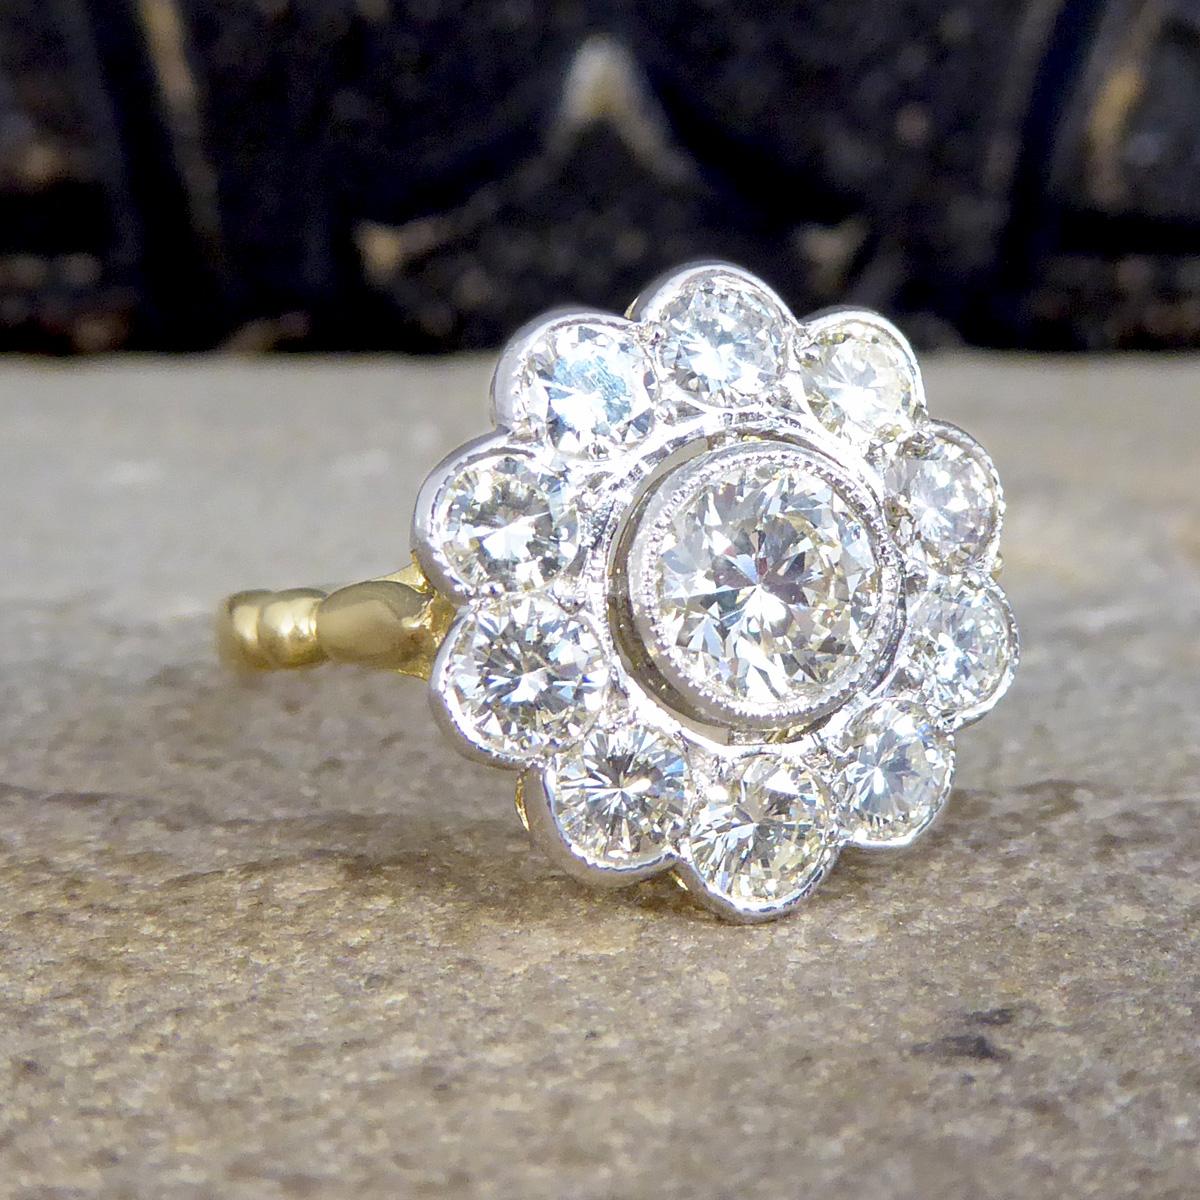 Such a stunning contemporary Daisy cluster that has been made to resemble a 1920's style ring. It is set with Round Brilliant cut Diamonds giving it a total carat weight of 1.85ct with the centre being the largest weighing approximately 0.65ct in a